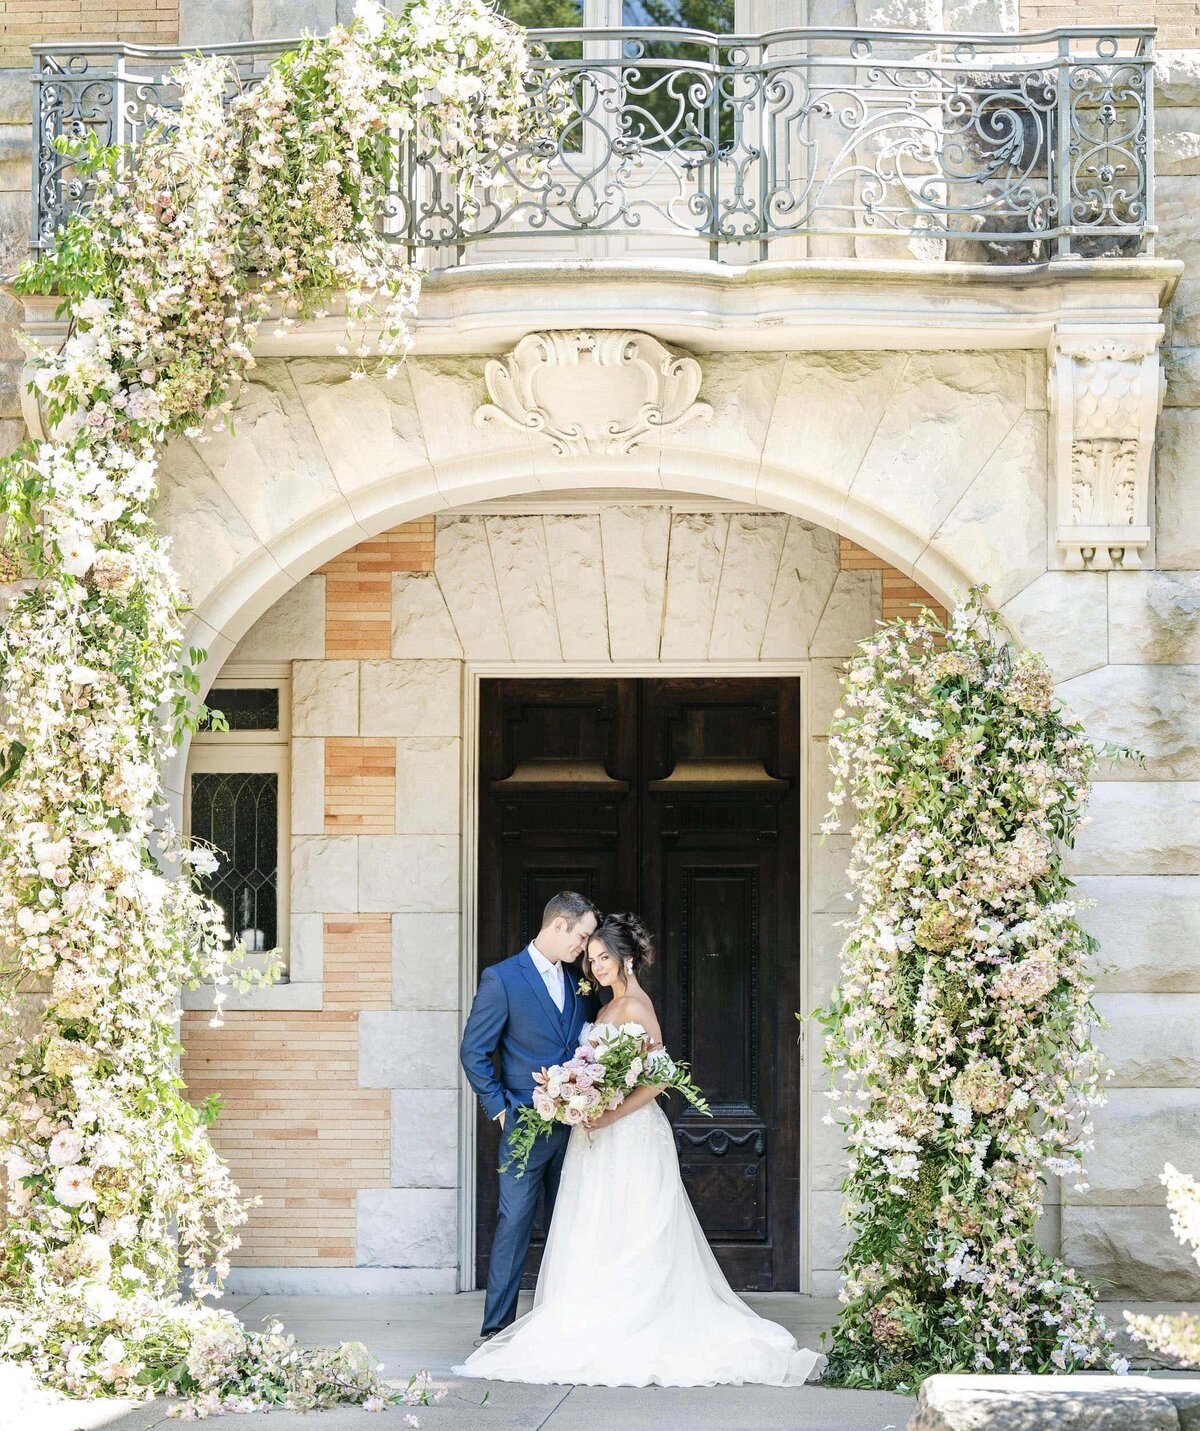 Bride and groom with large floral installation